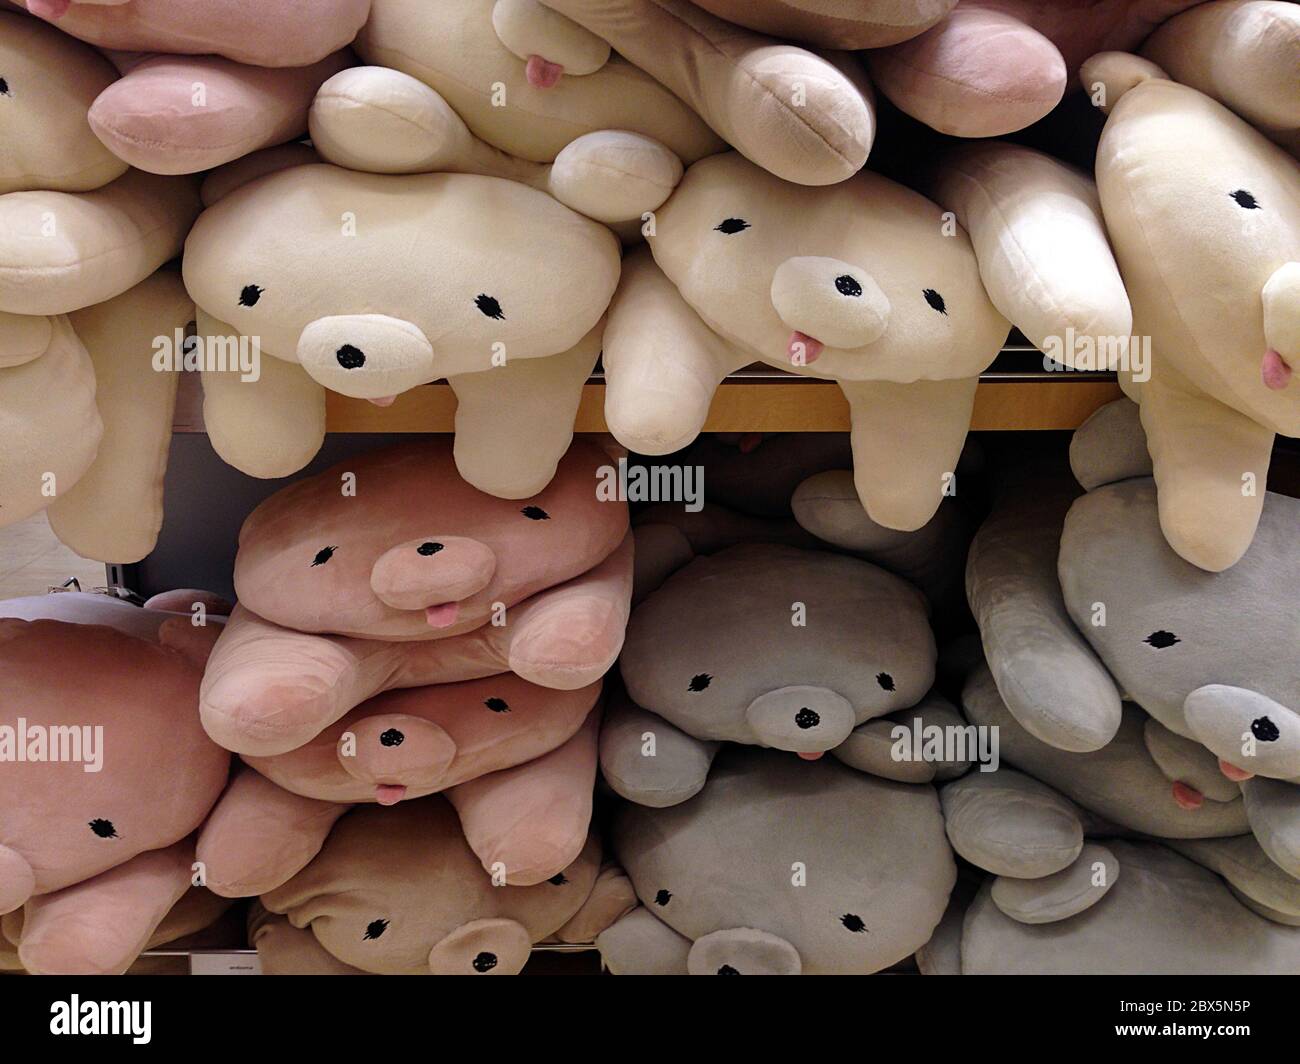 Many cute bear/dog stuffed animals with funny facial expressions in pastel colors in Japanese store. Stock Photo